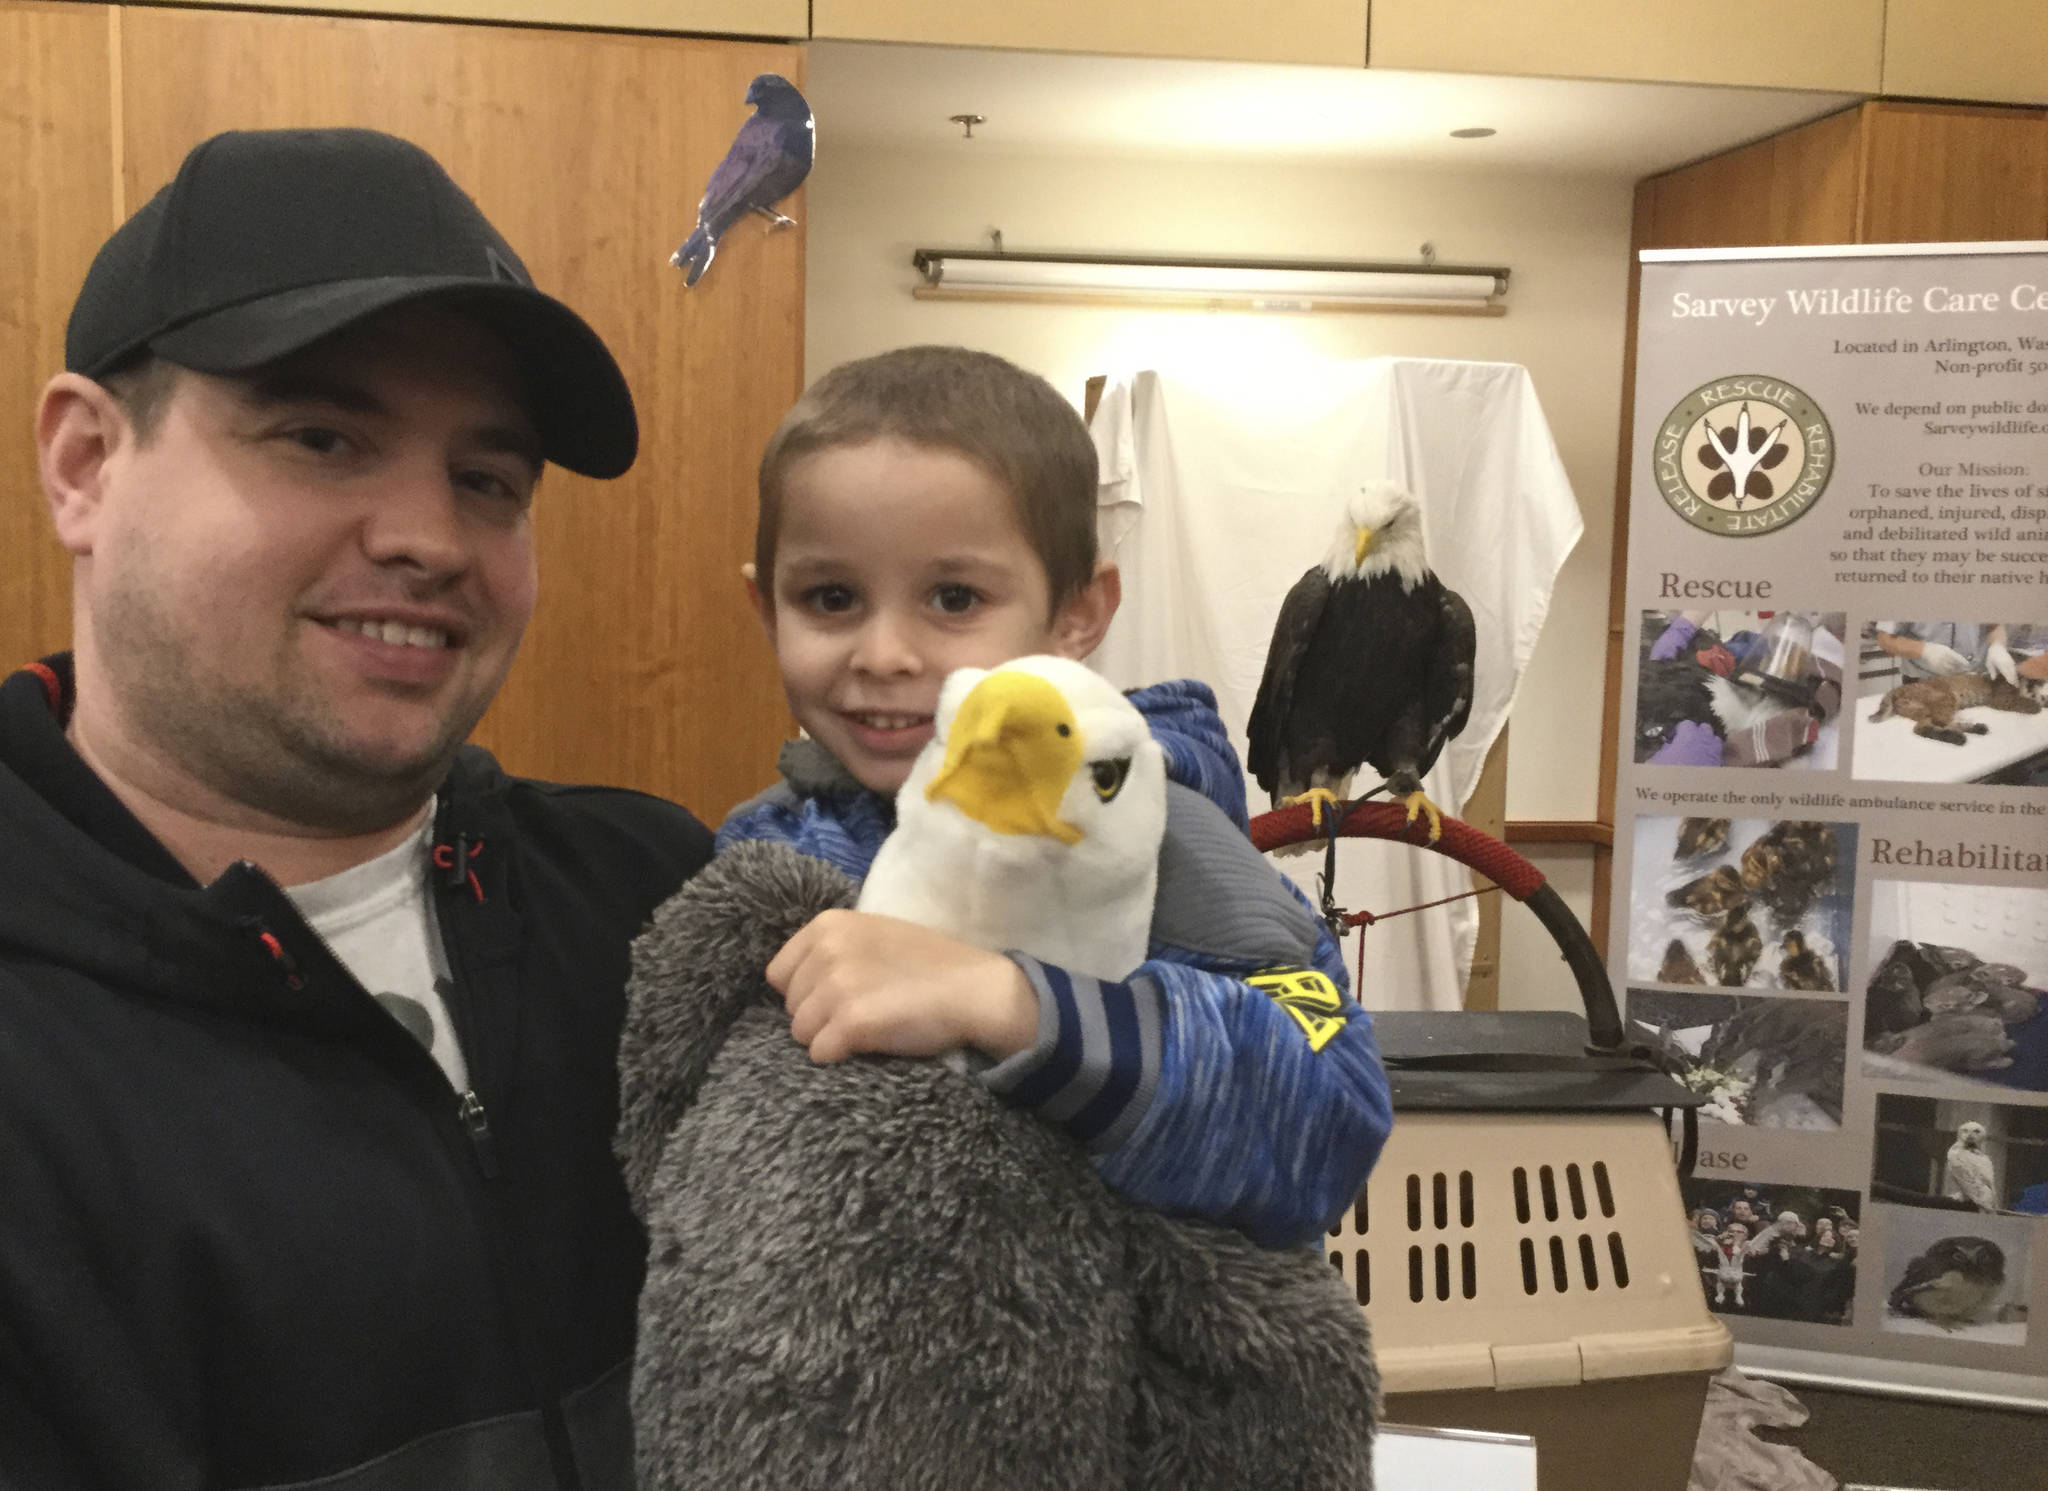 Robbie Turrone of Arlington, pictured with dad Robert, clutches his stuffed eagle toy while a real bald eagle, Freedom, looks on from behind. Freedom was the main attraction at a Sarvey Wildlife Center open house during last weekend’s annual Arlington Eagle Festival.